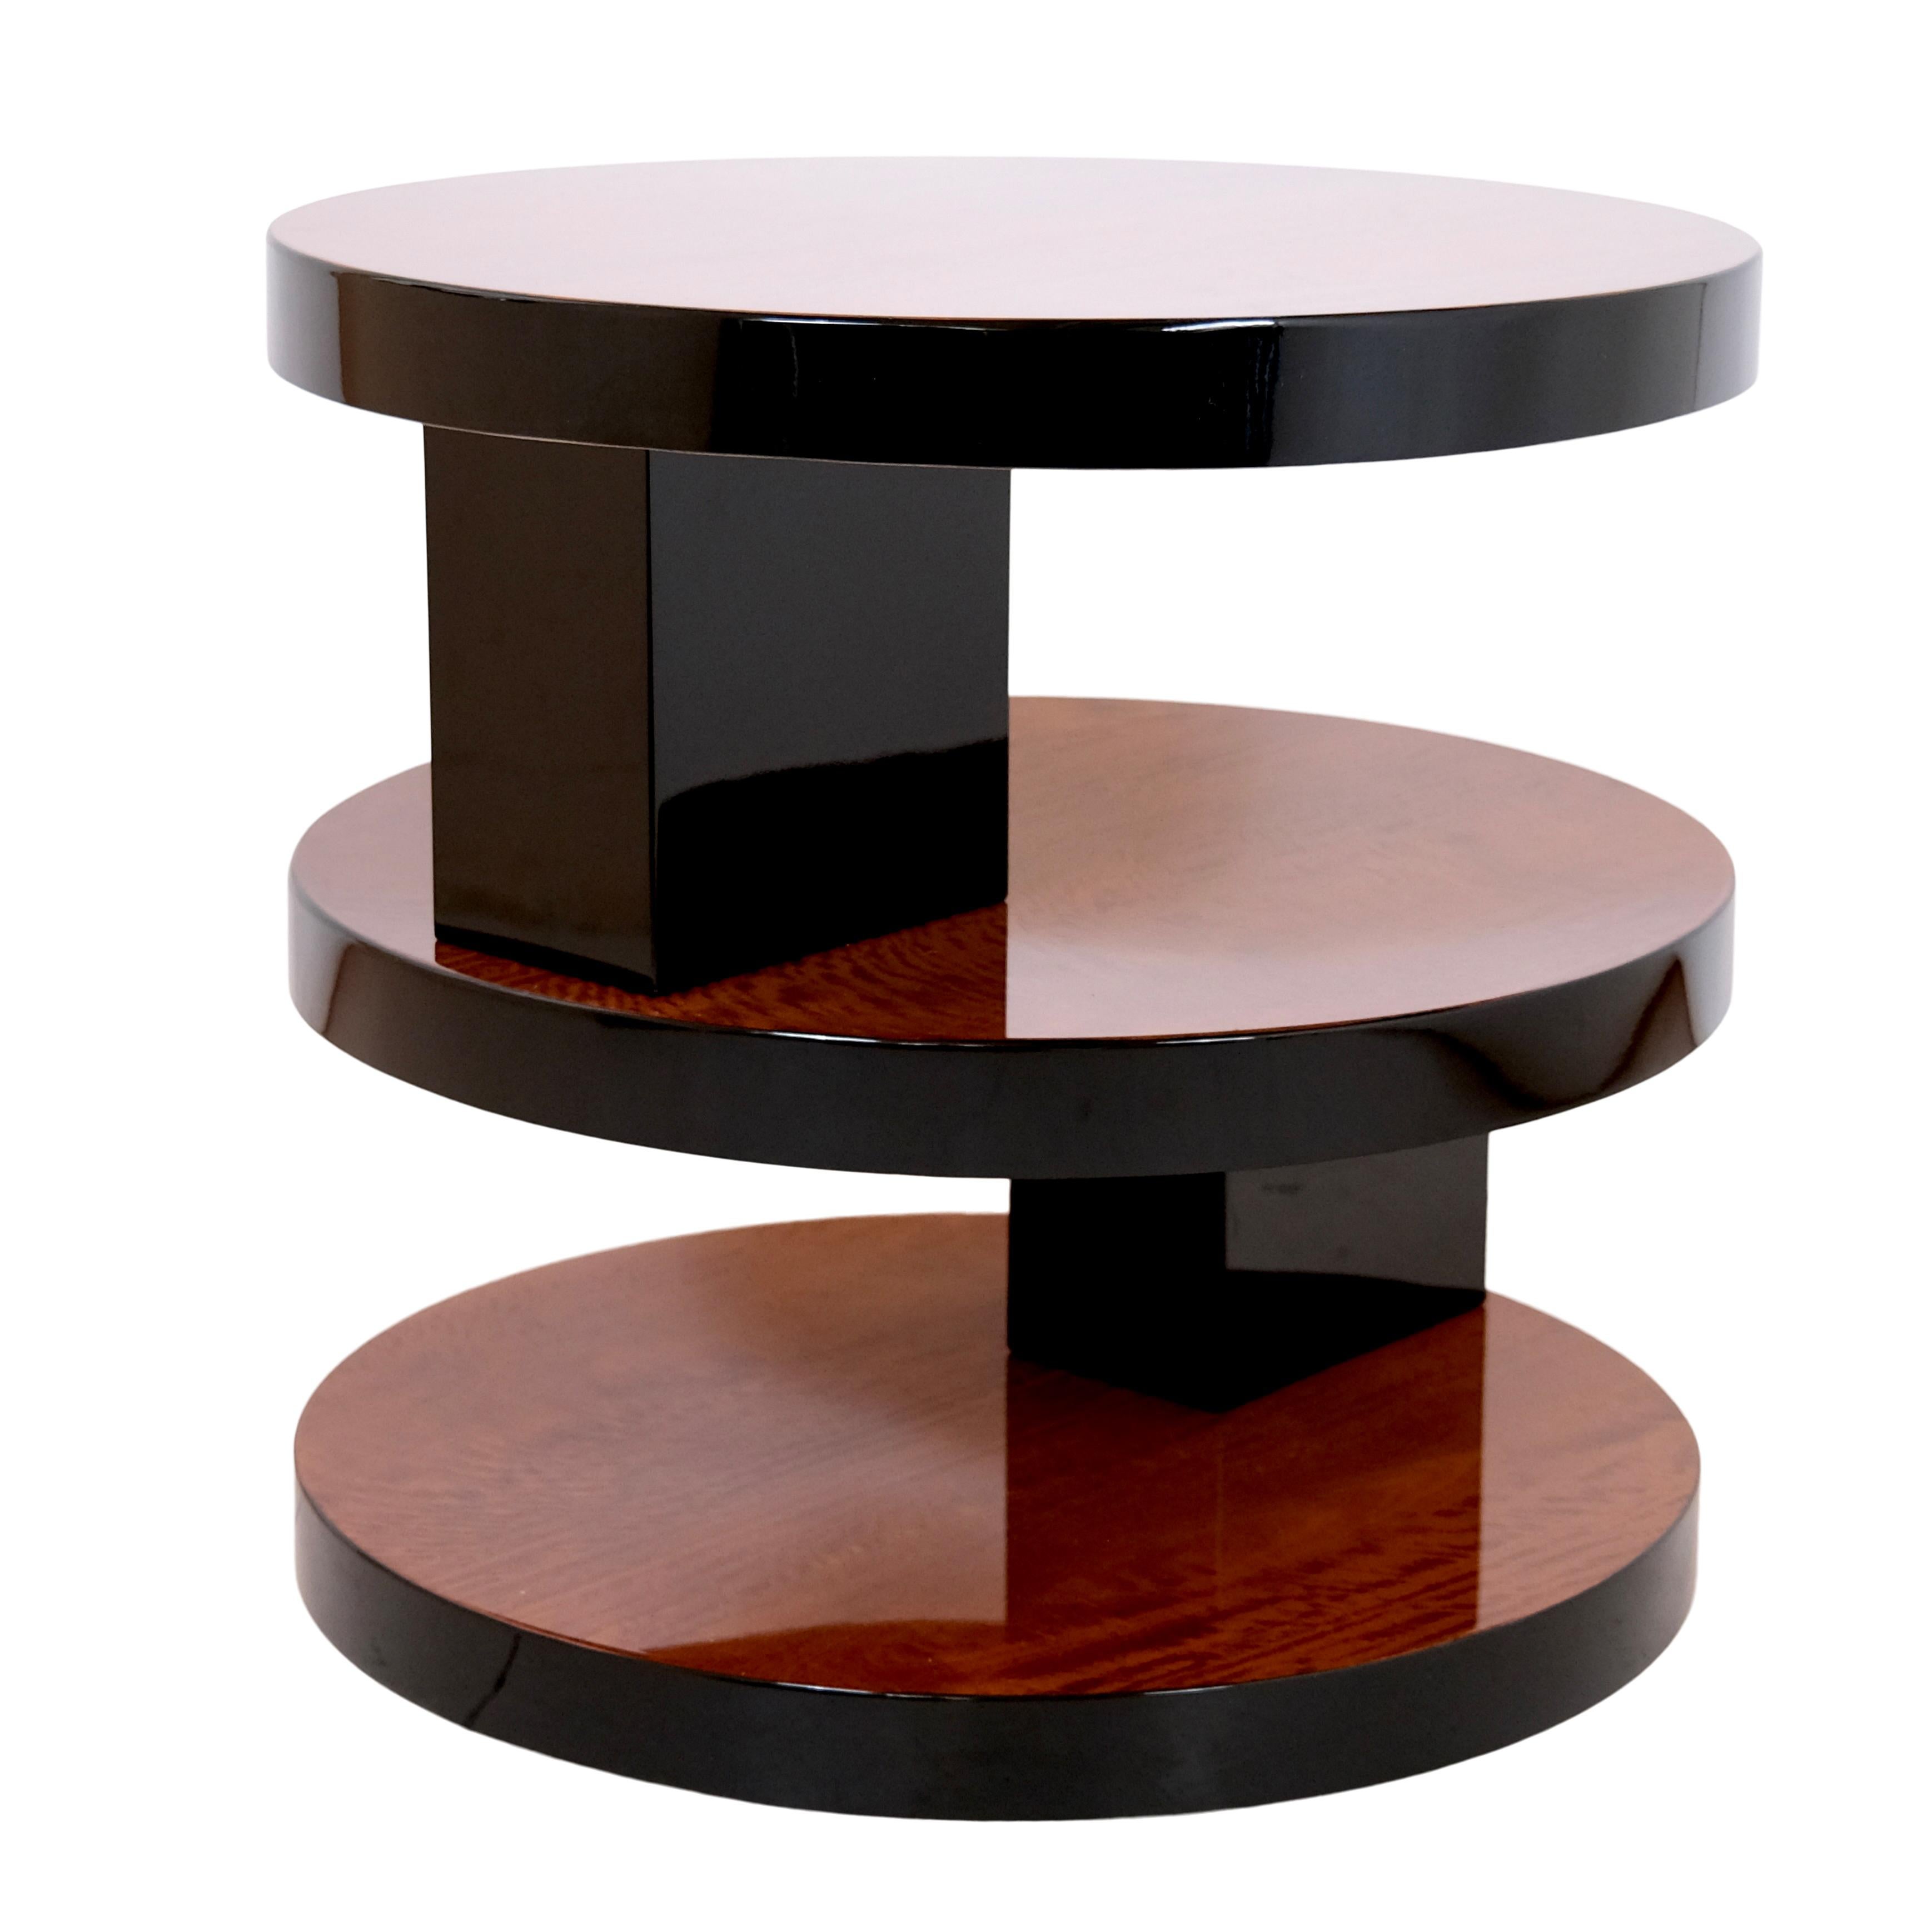 Round French Art Deco Mahogany Side Table with Black Lacquer with Three Levels 1